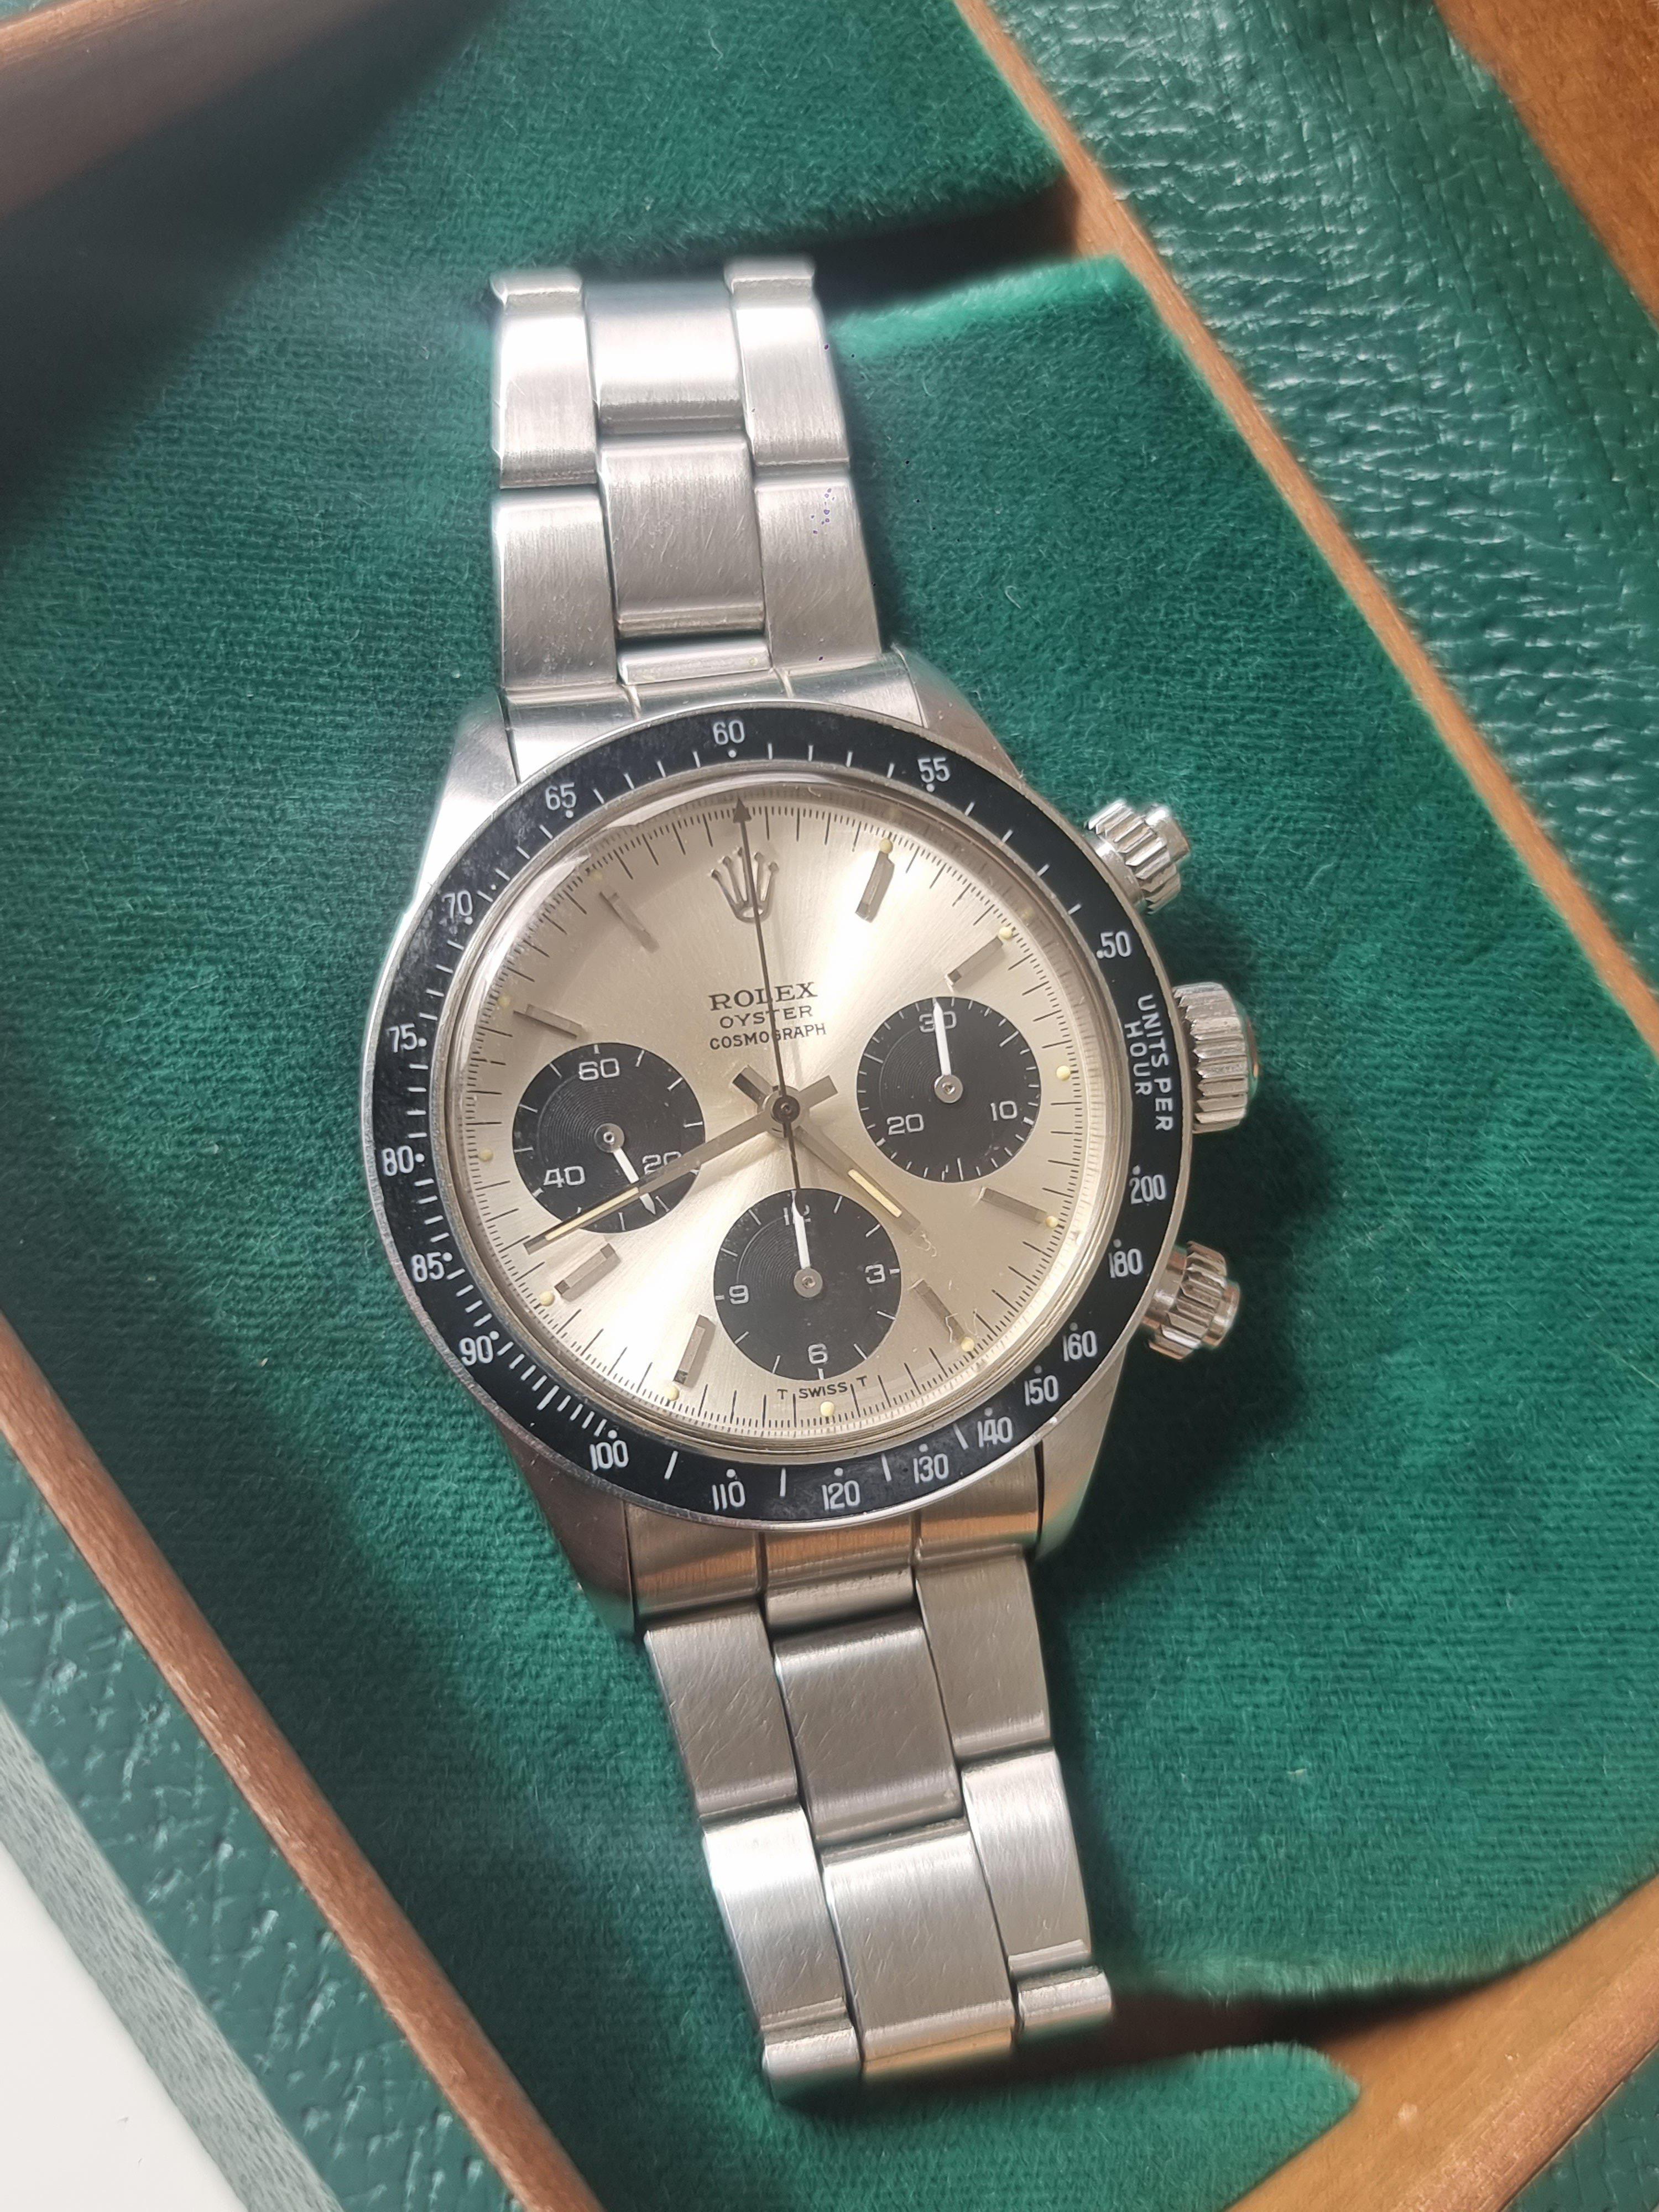 A rare Rolex cosmograph Daytona reference 6263 manual wind column wheel chronograph adjusted to thre